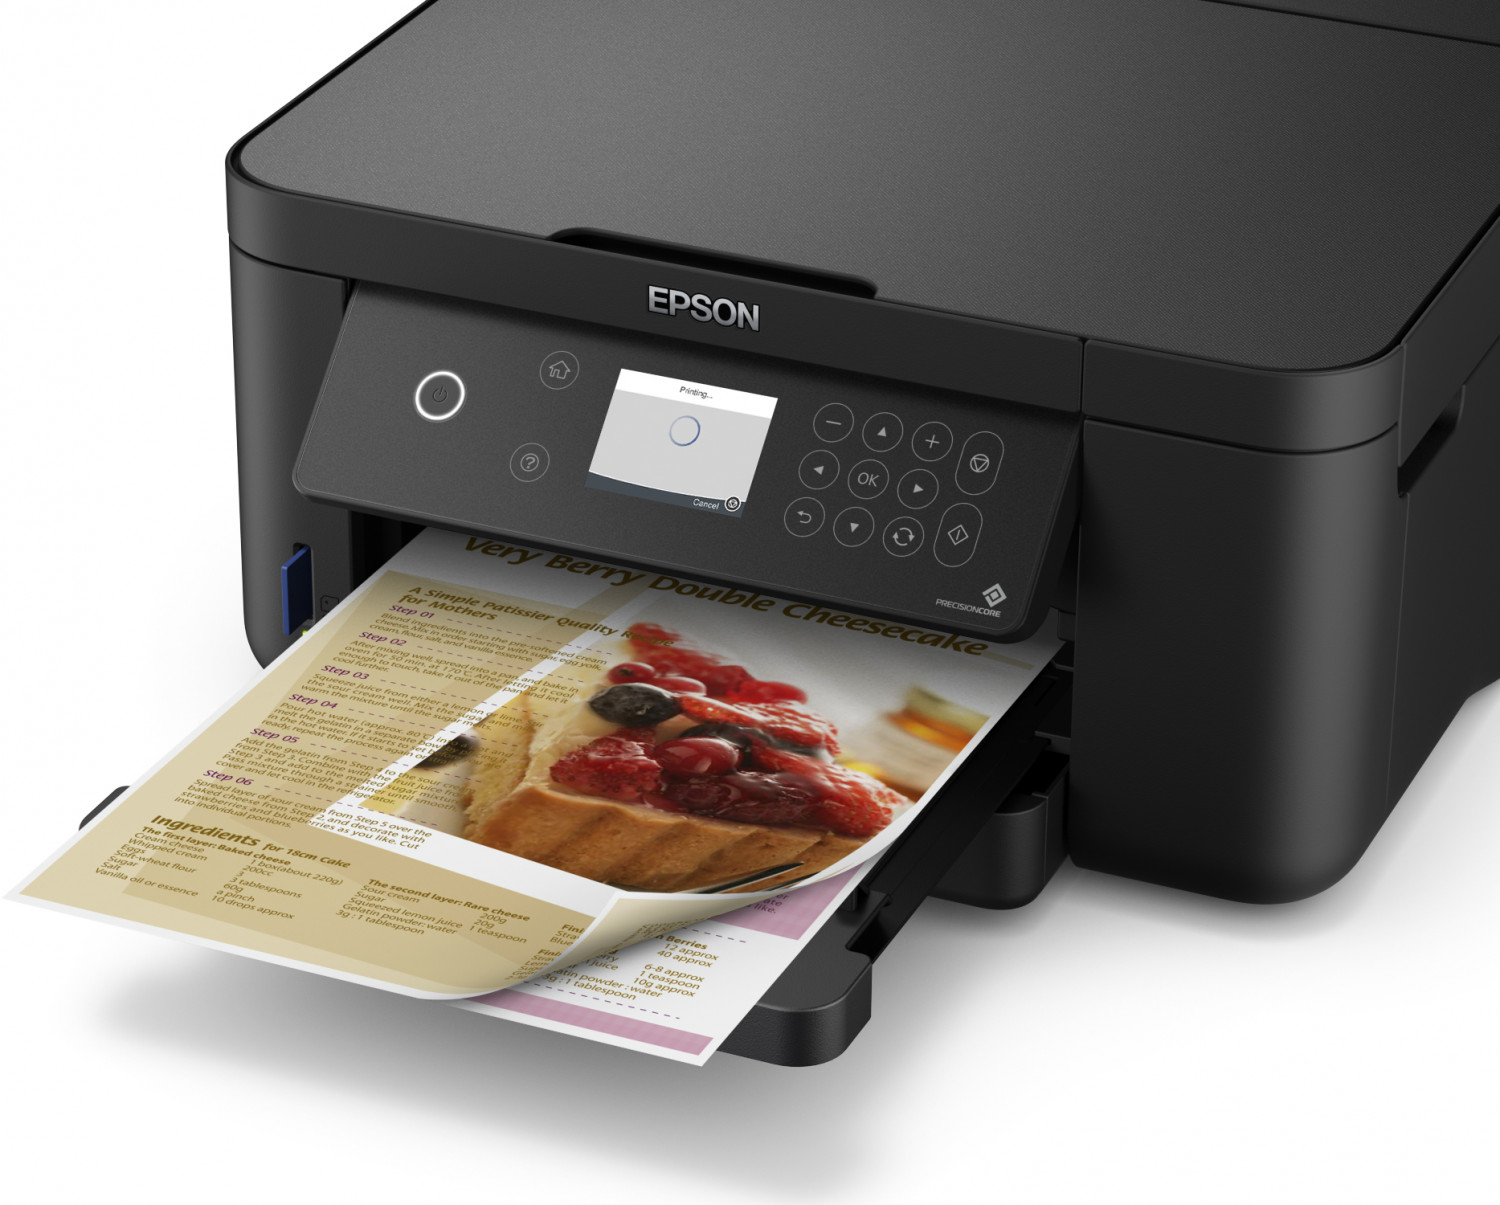 Epson Expression Home XP5100